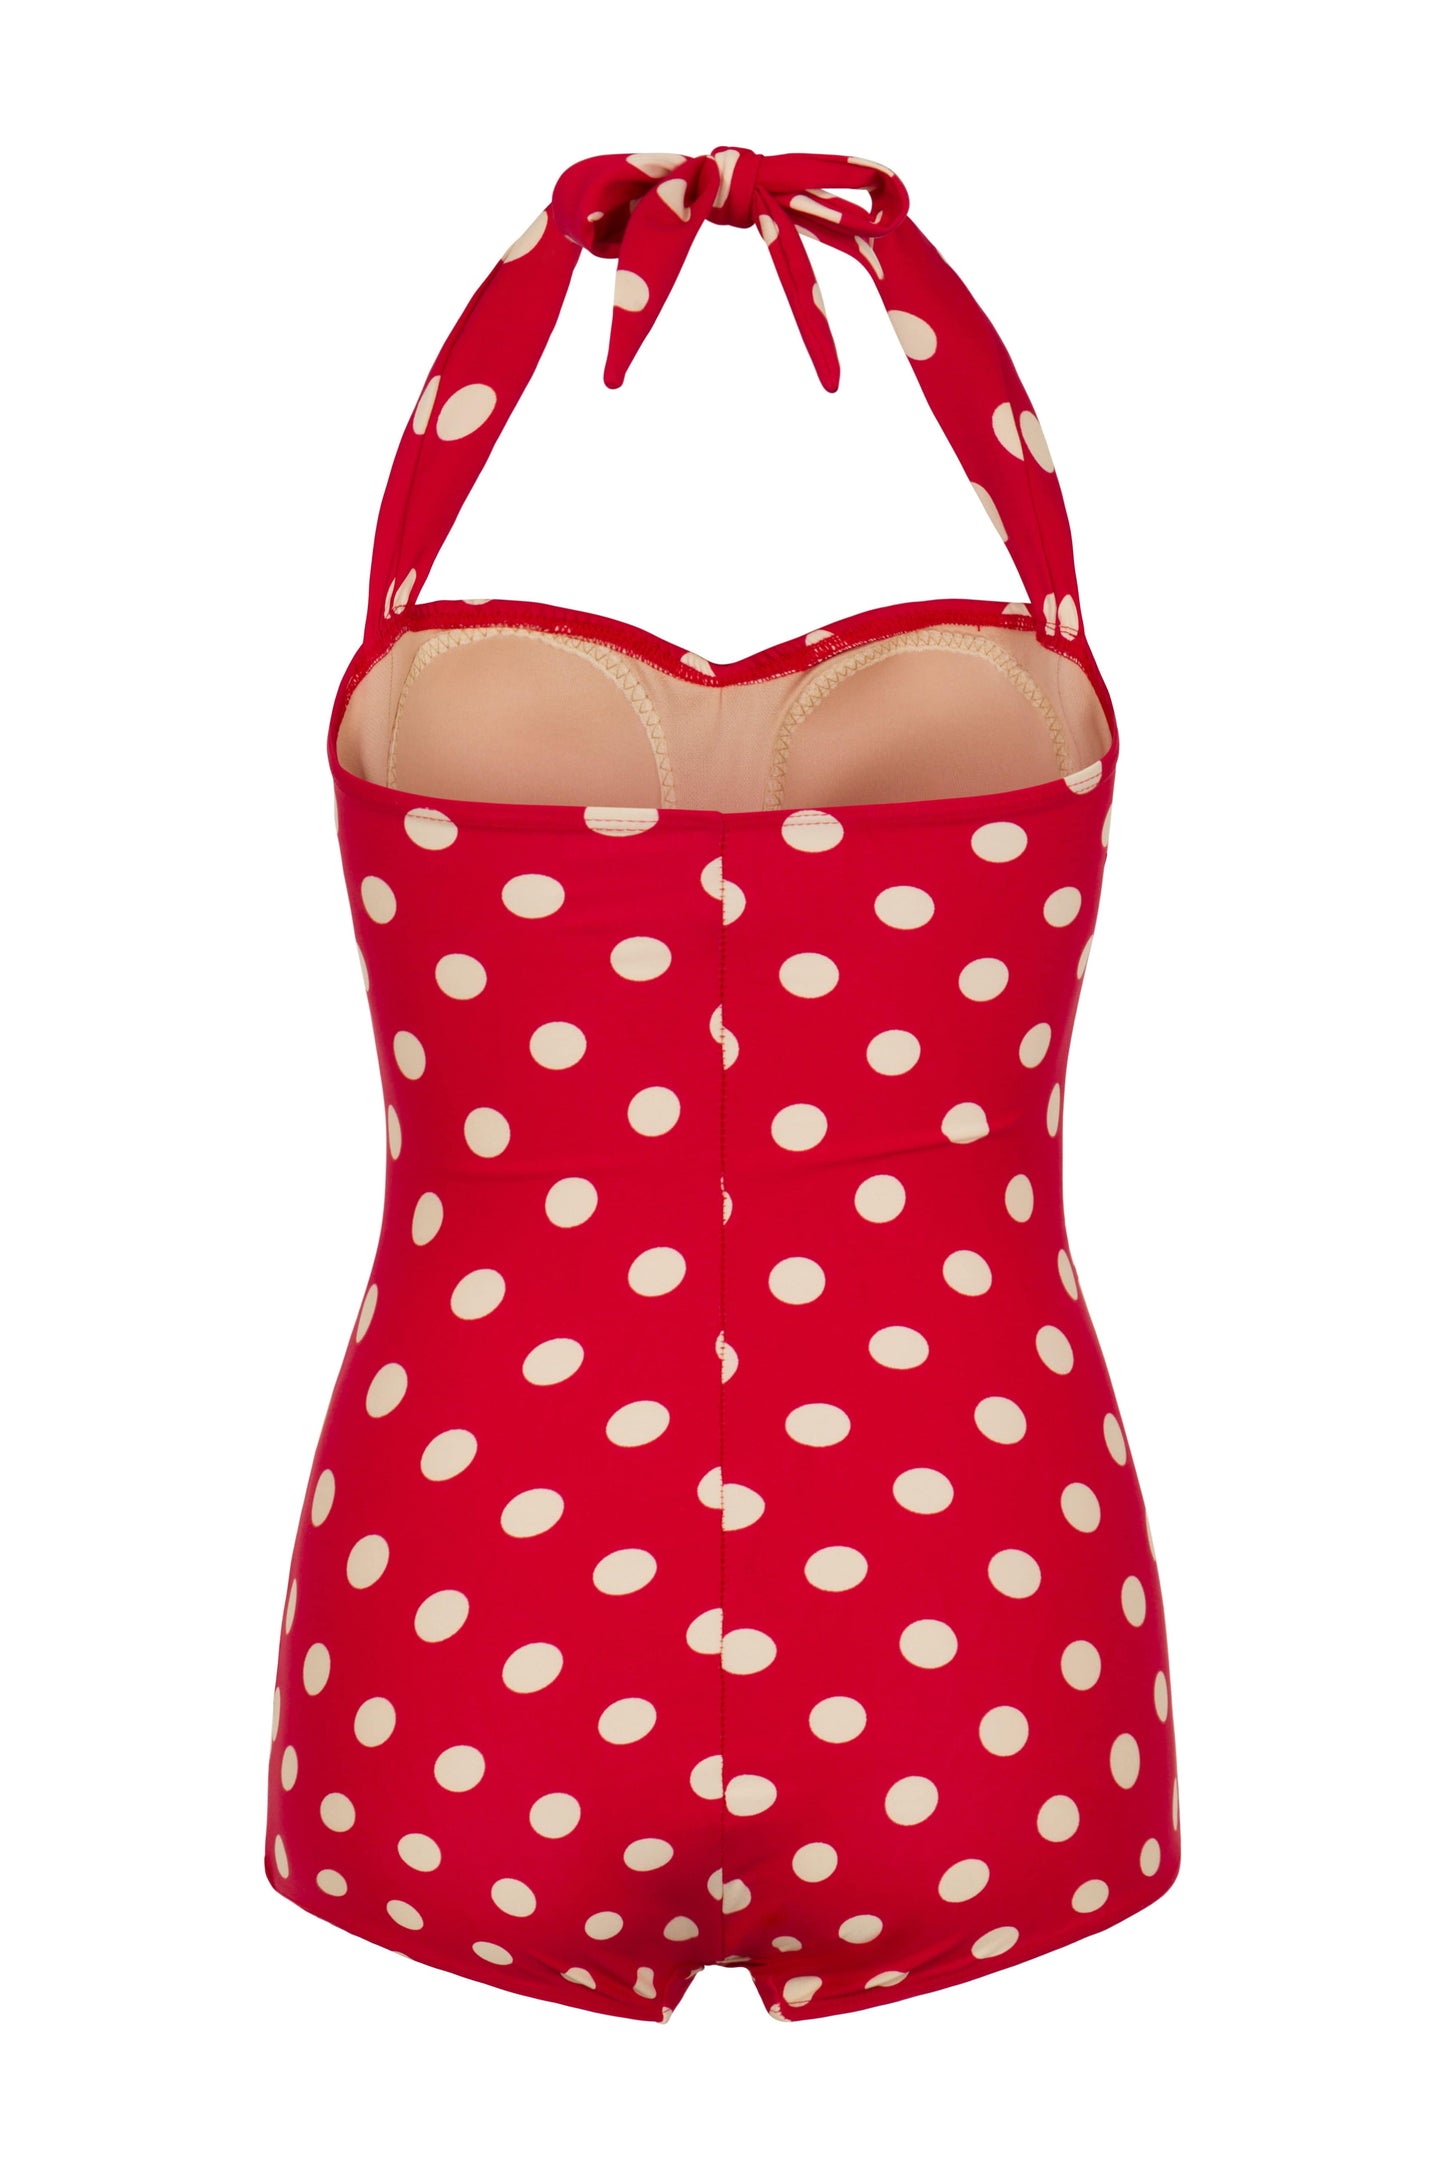 BettyliciousUK Esther Williams Red/White Polka Dot 1950's Style Swimsuit